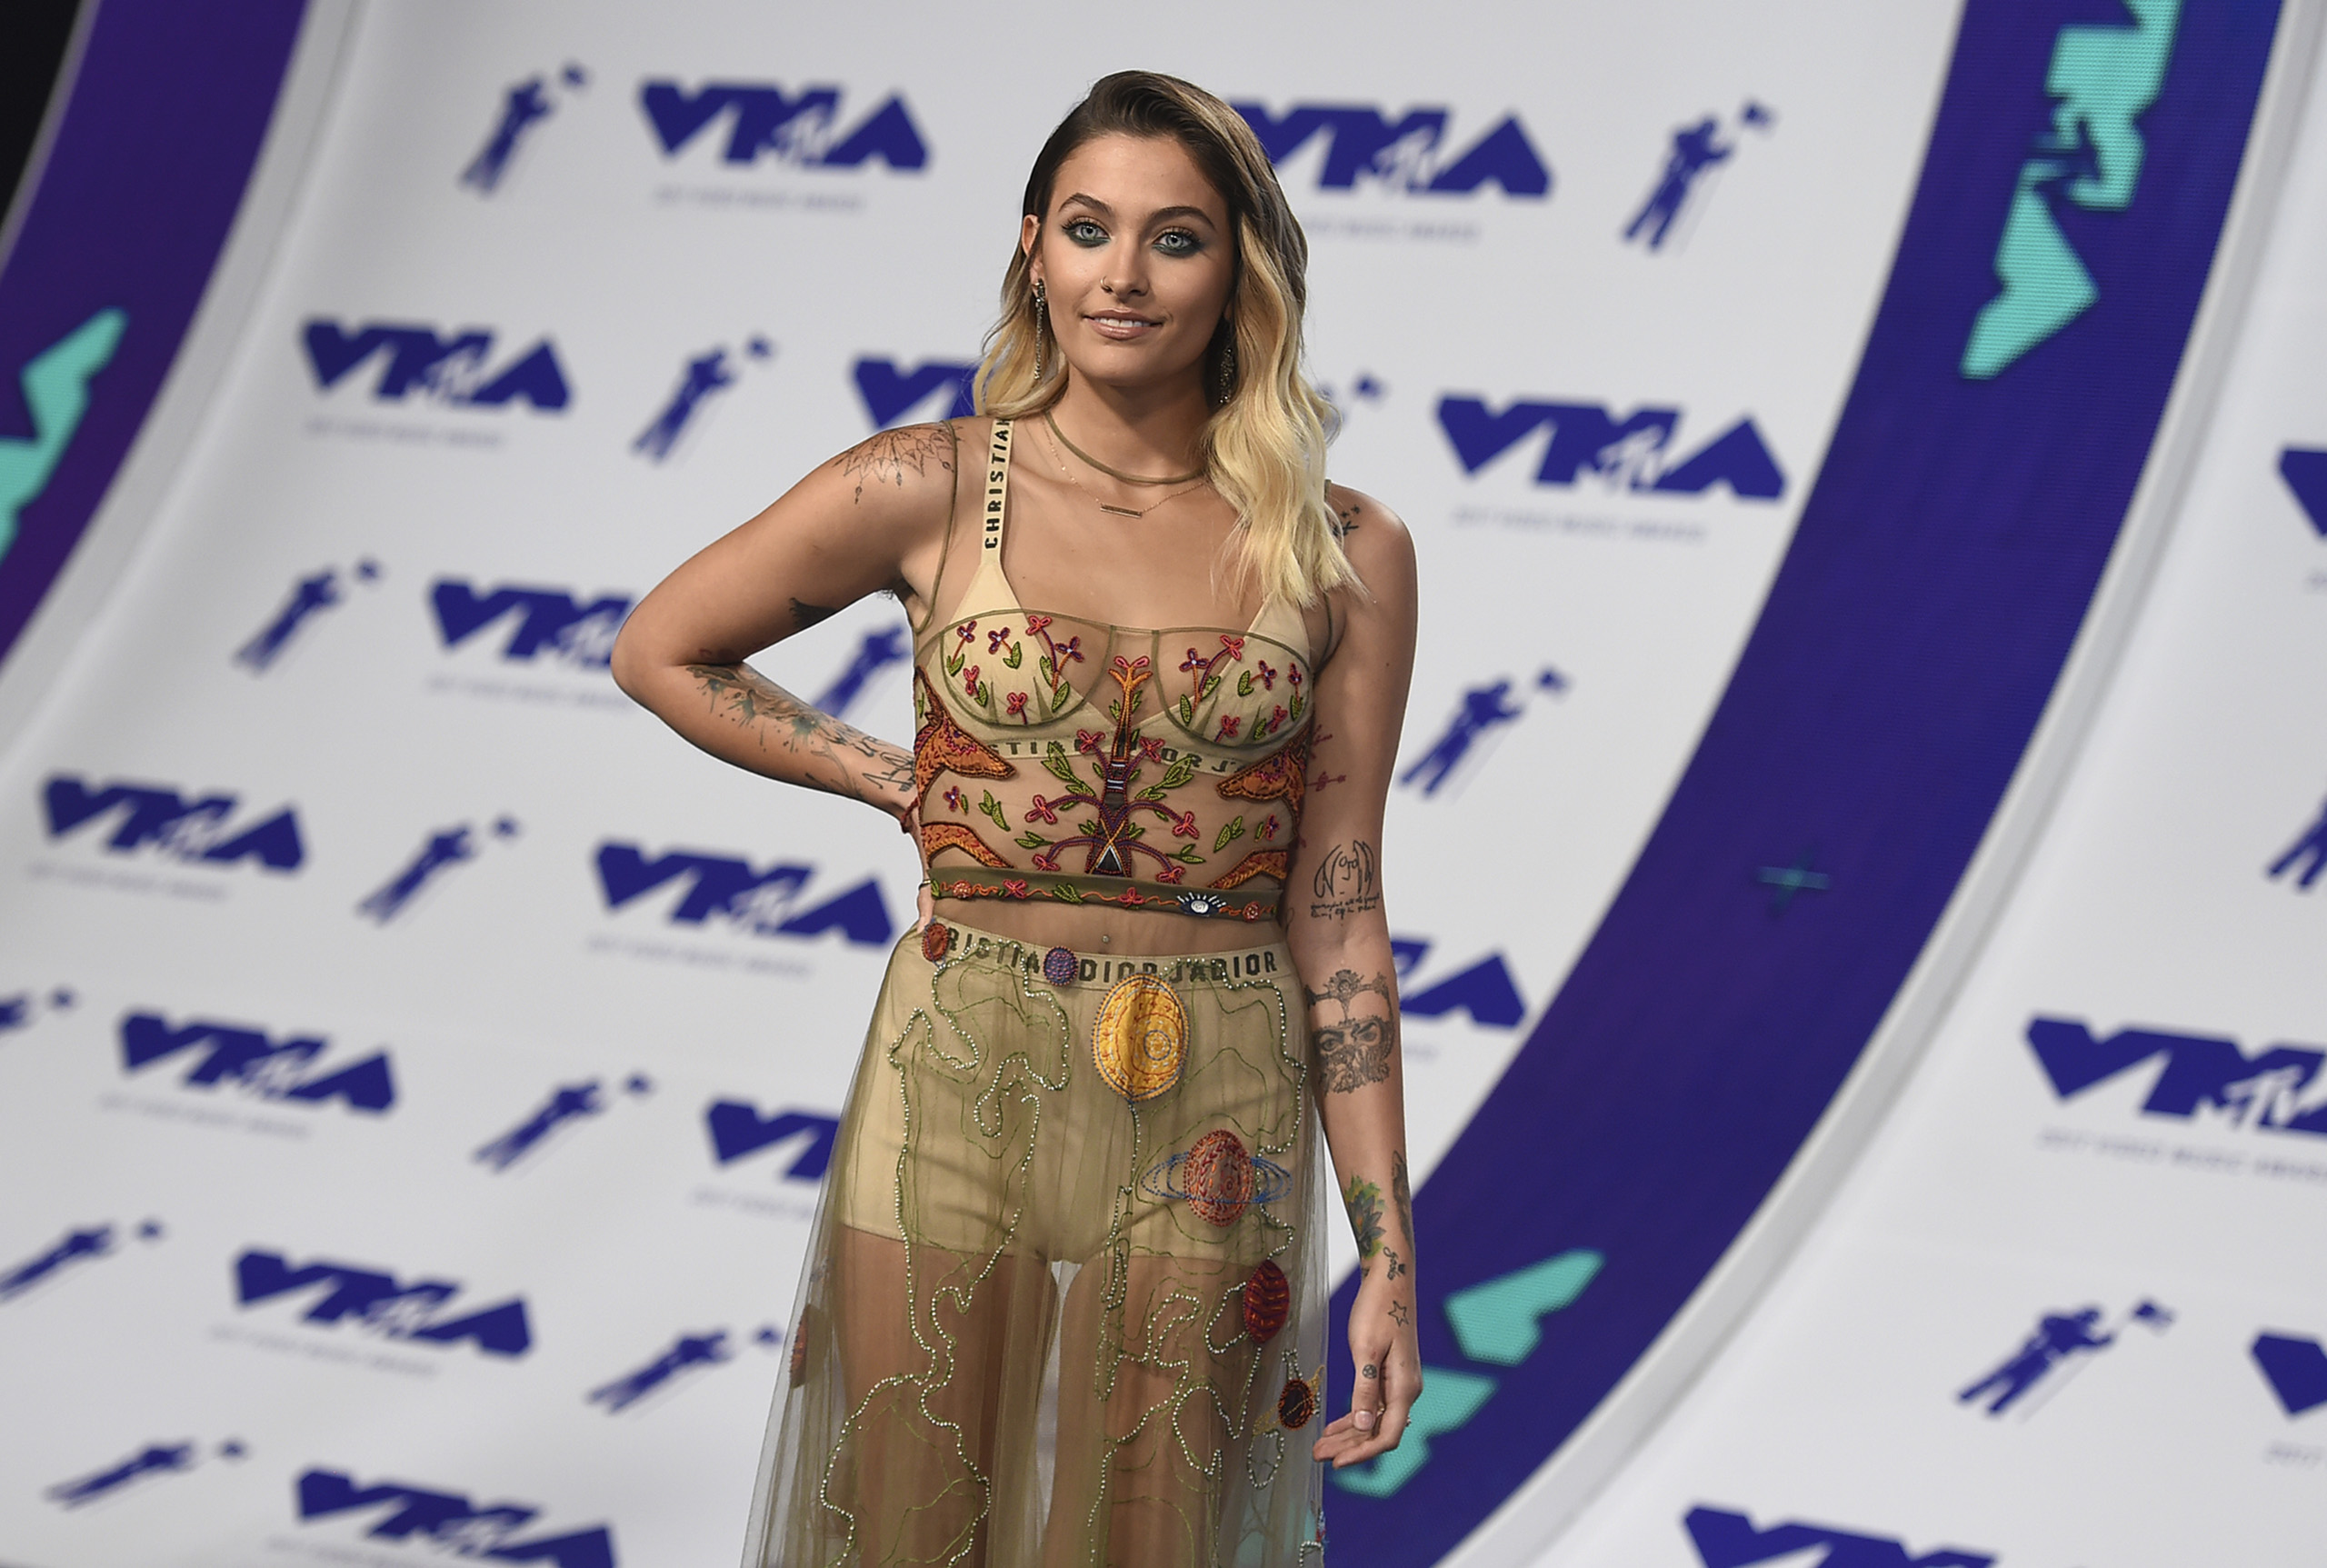 Paris Jackson arrives at the MTV Video Music Awards at The Forum on Sunday, Aug. 27, 2017, in Inglewood, Calif.